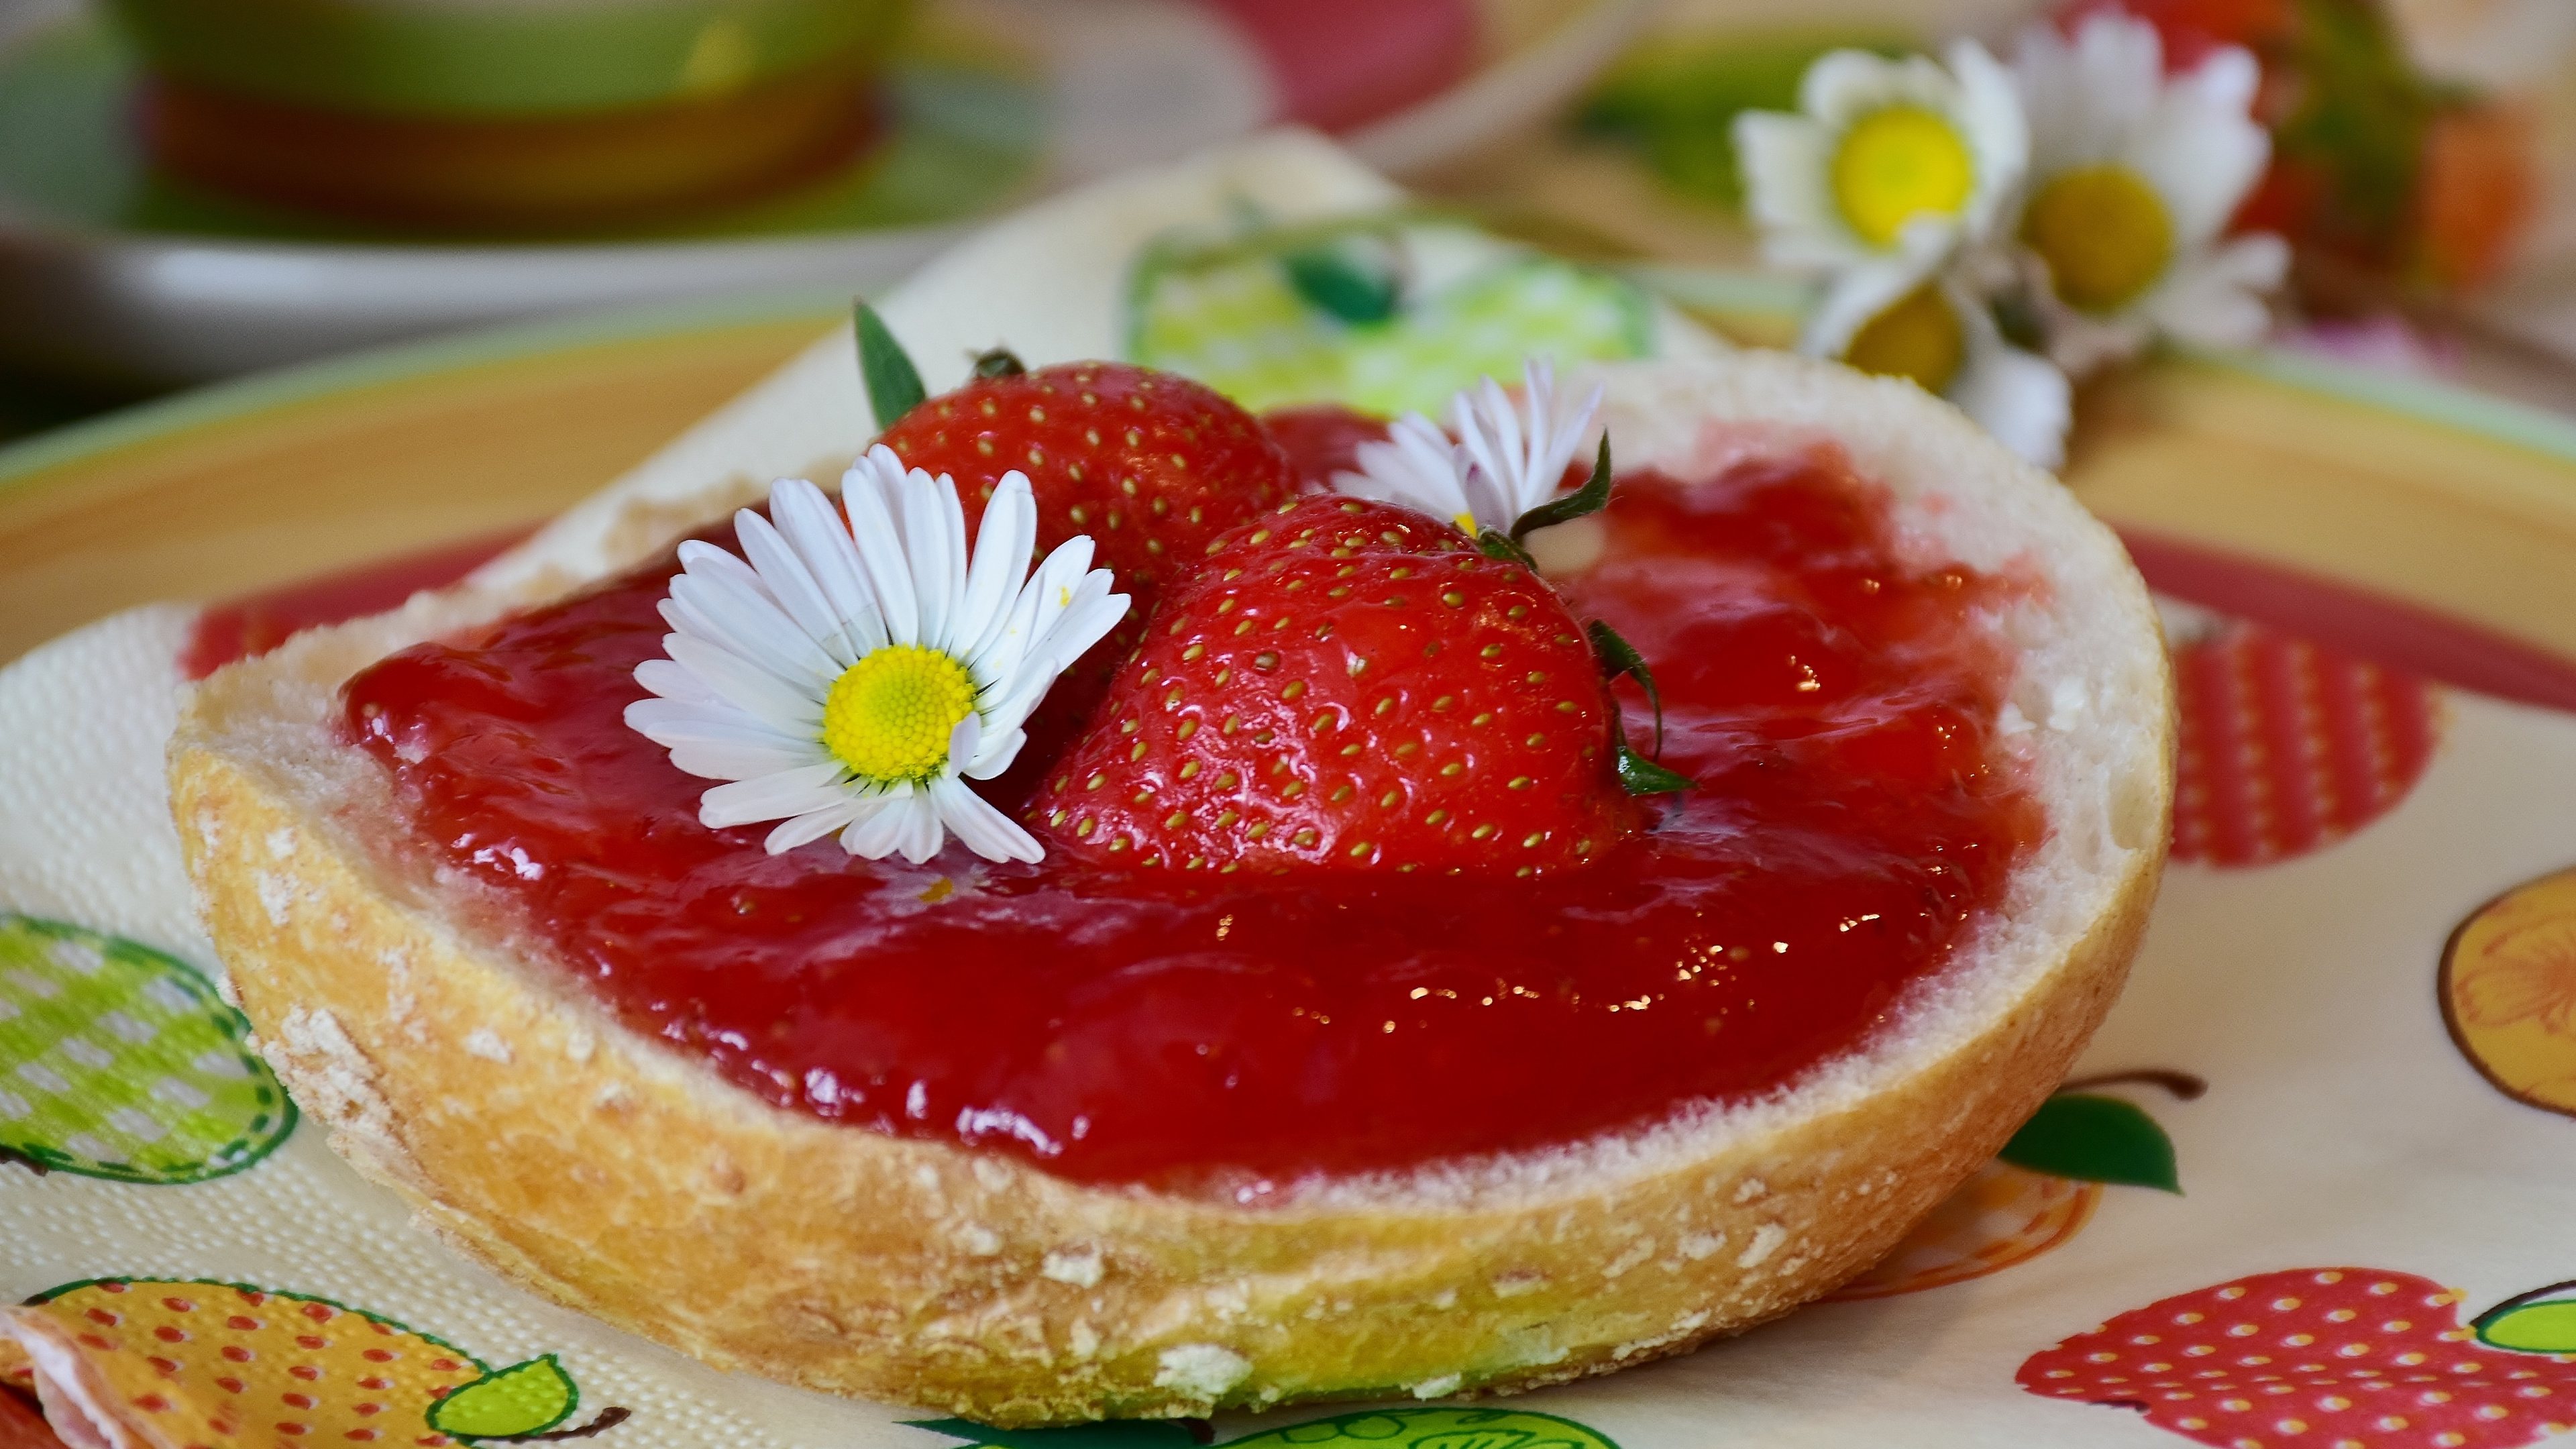 Strawberry on Bread With Cream on Top. Wallpaper in 3840x2160 Resolution